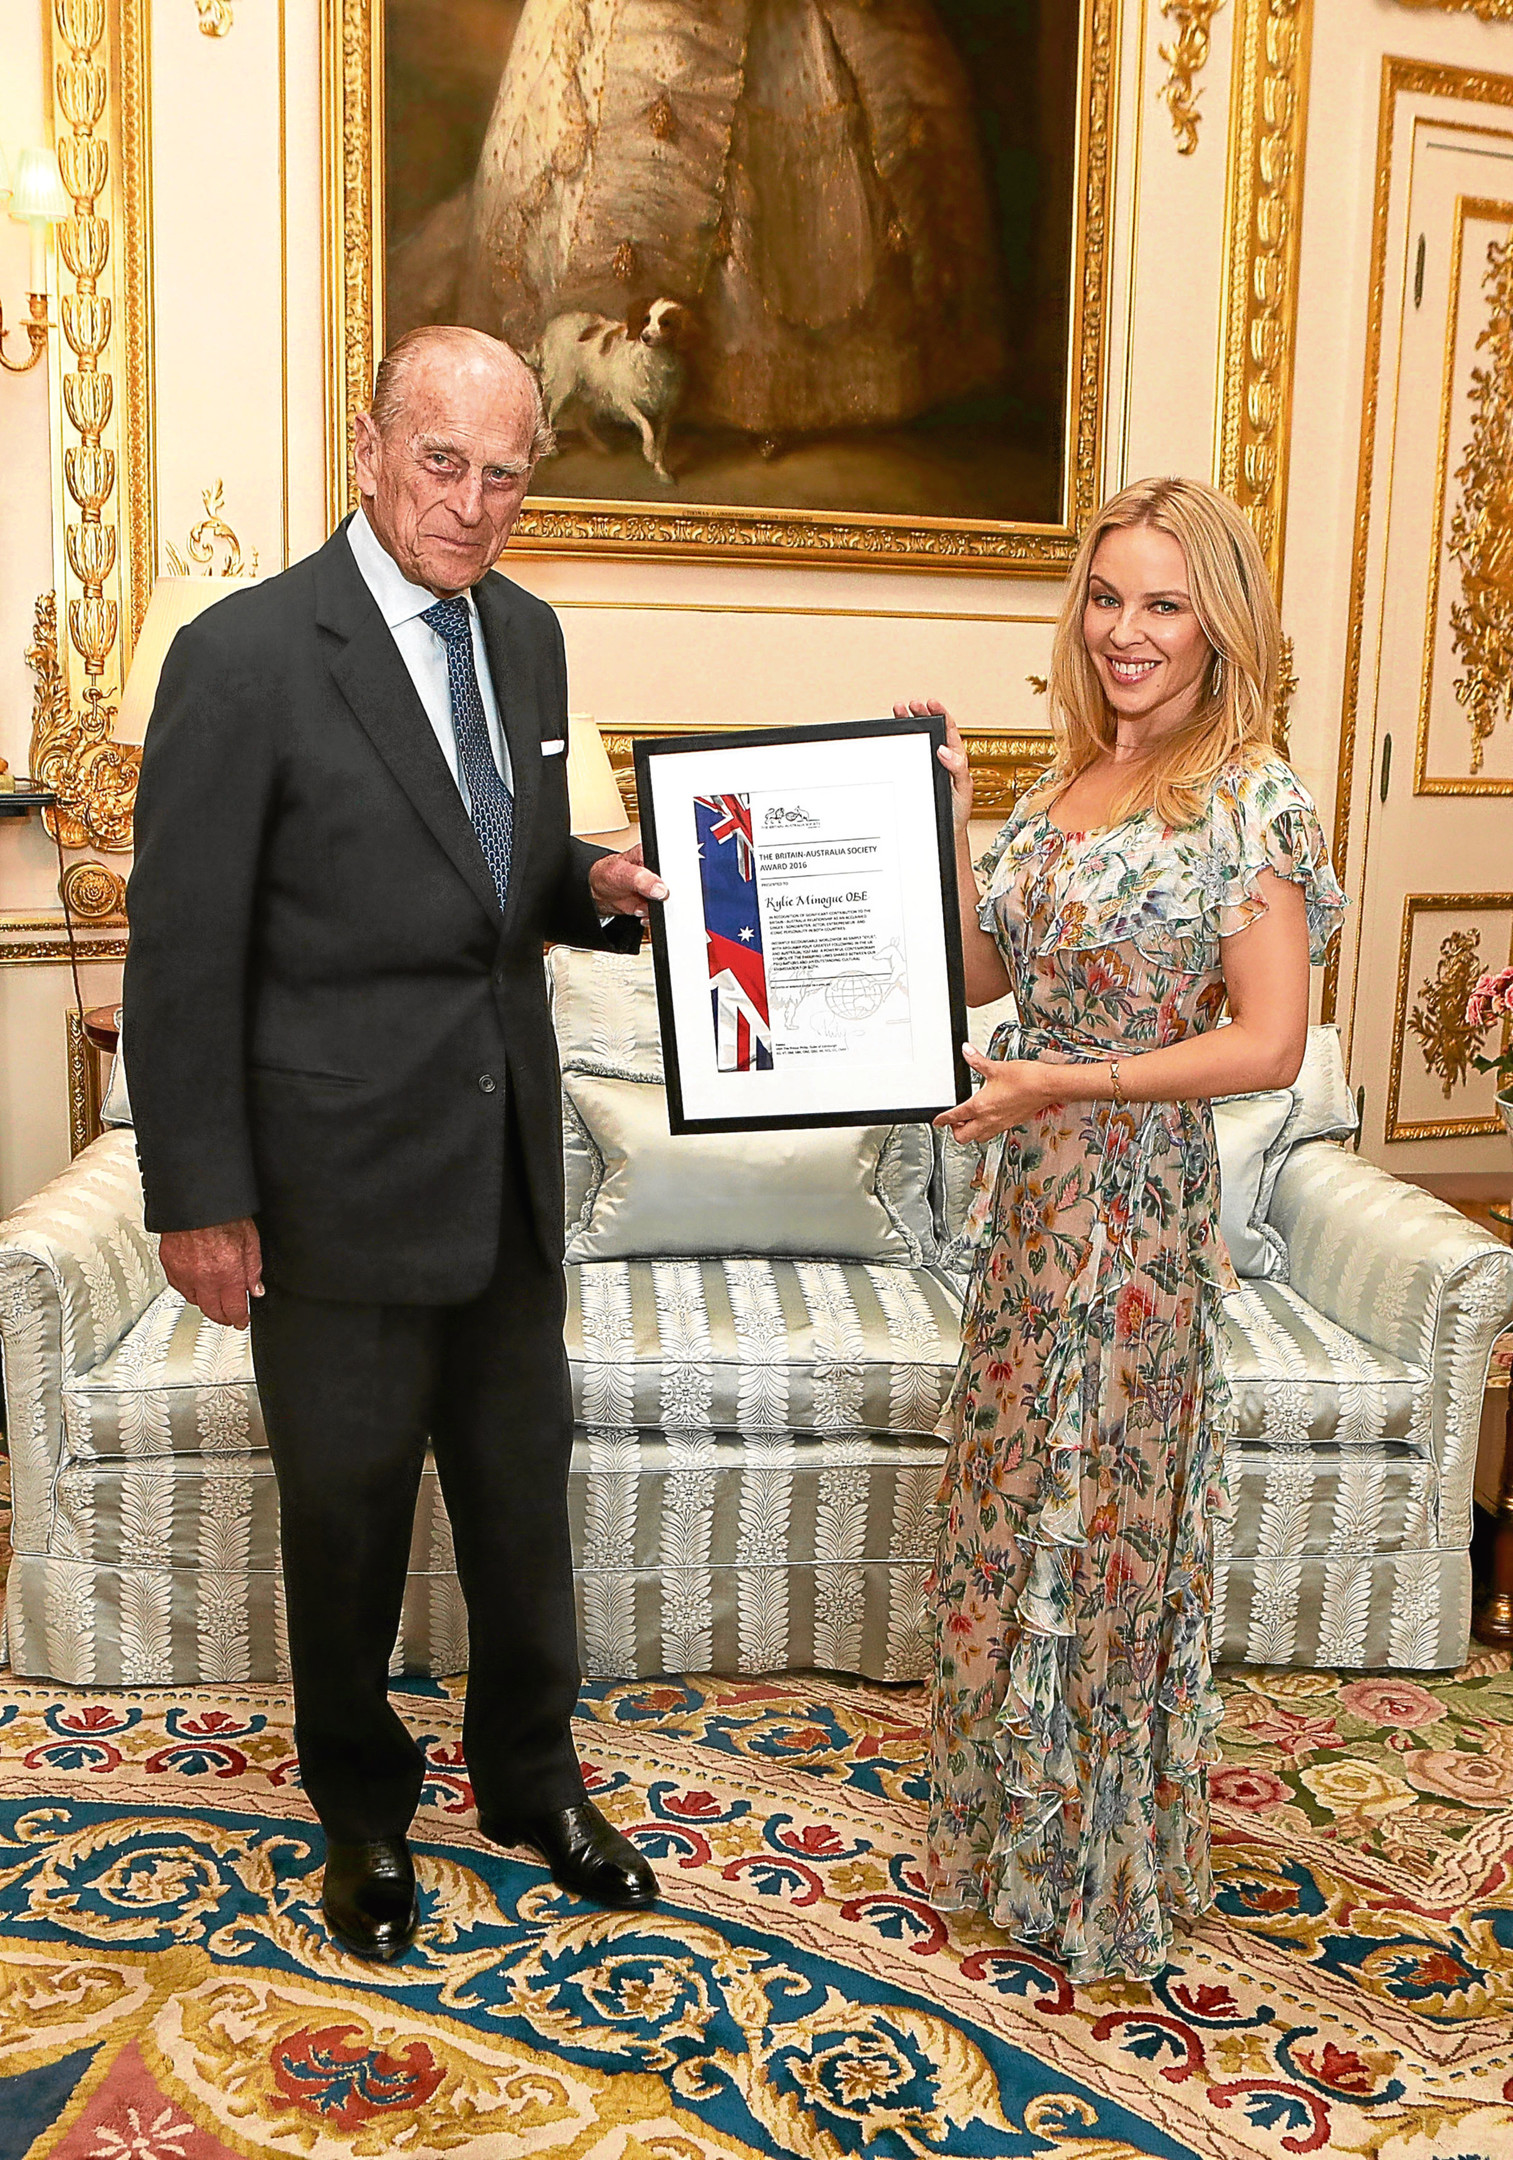 The Duke of Edinburgh, presents Kylie Minogue with the Britain-Australia Society Award for 2016 (Steve Parsons/PA Wire)